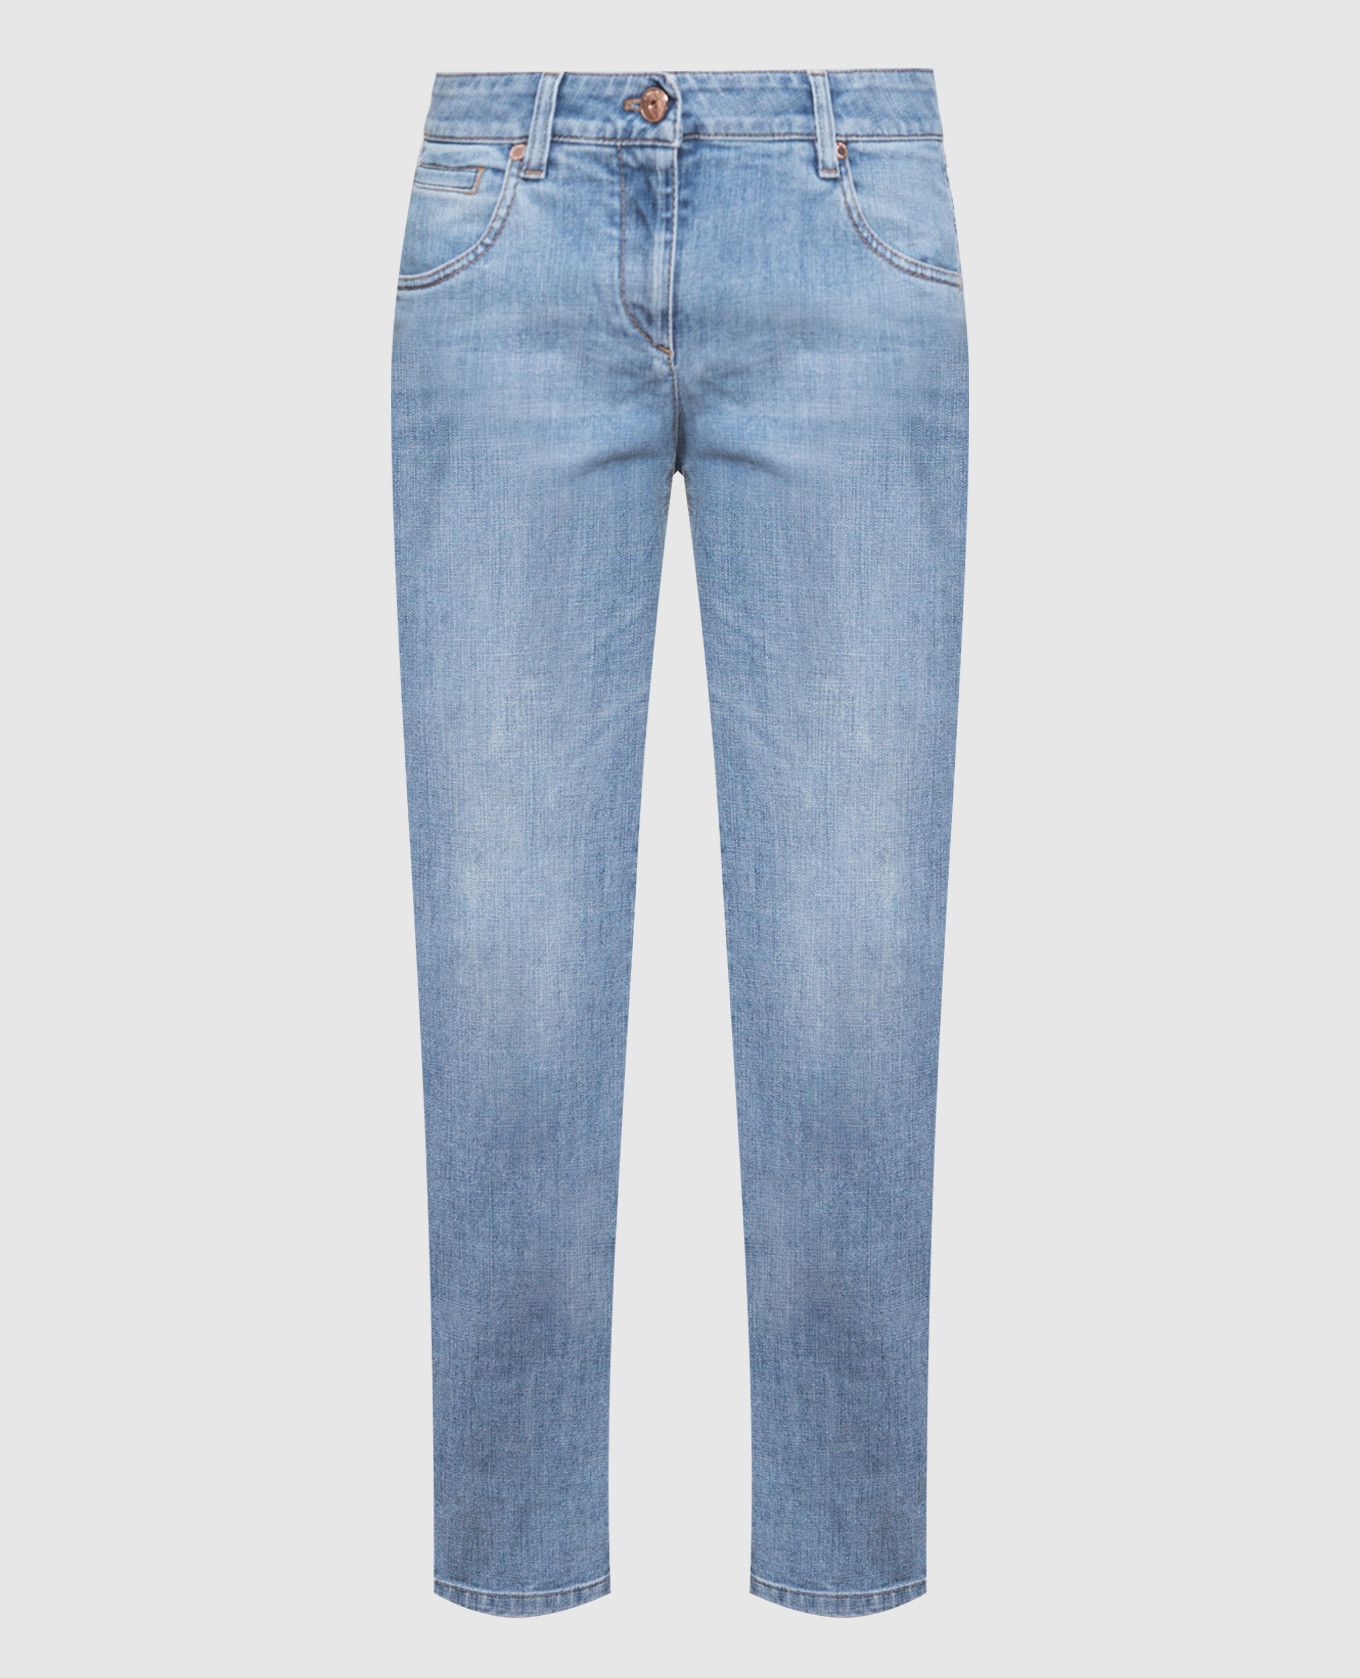 Blue jeans with eco-brass